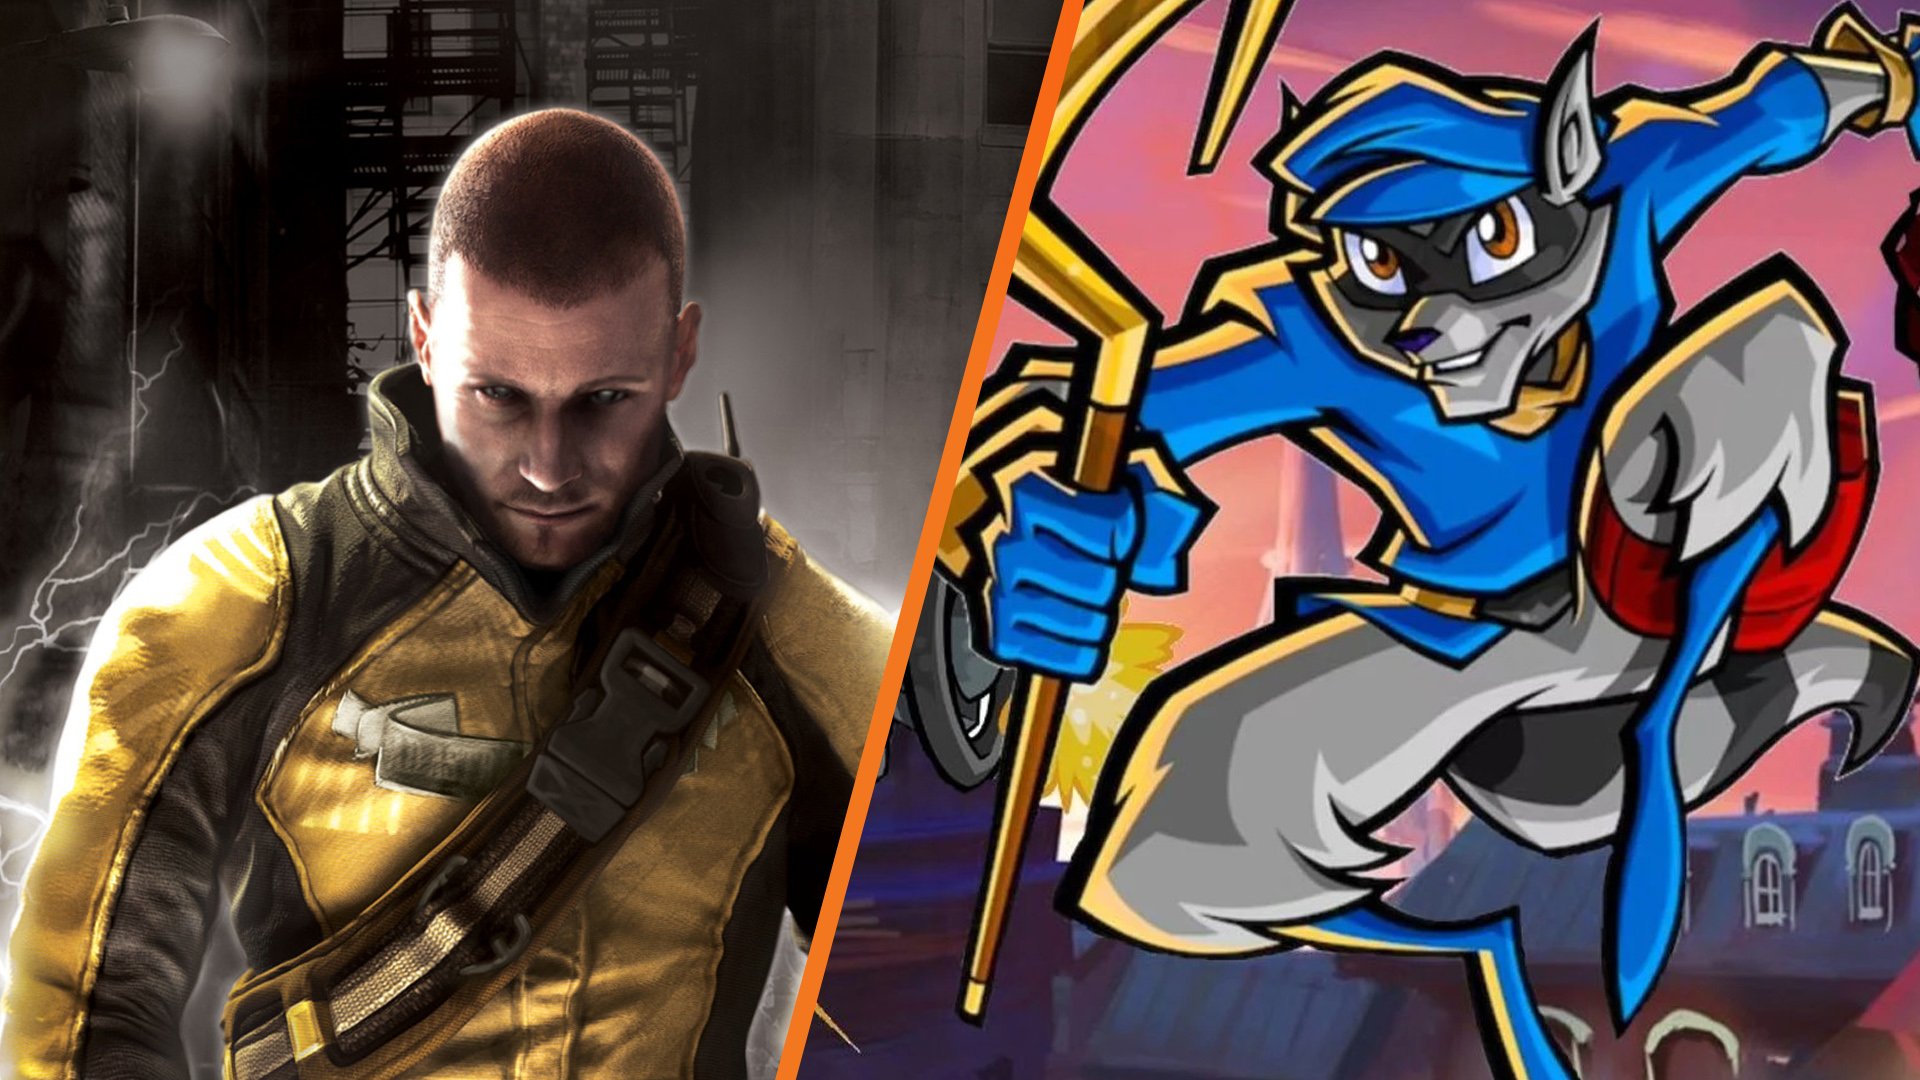 No New Sly Cooper or Infamous Games Planned, Says Sucker Punch